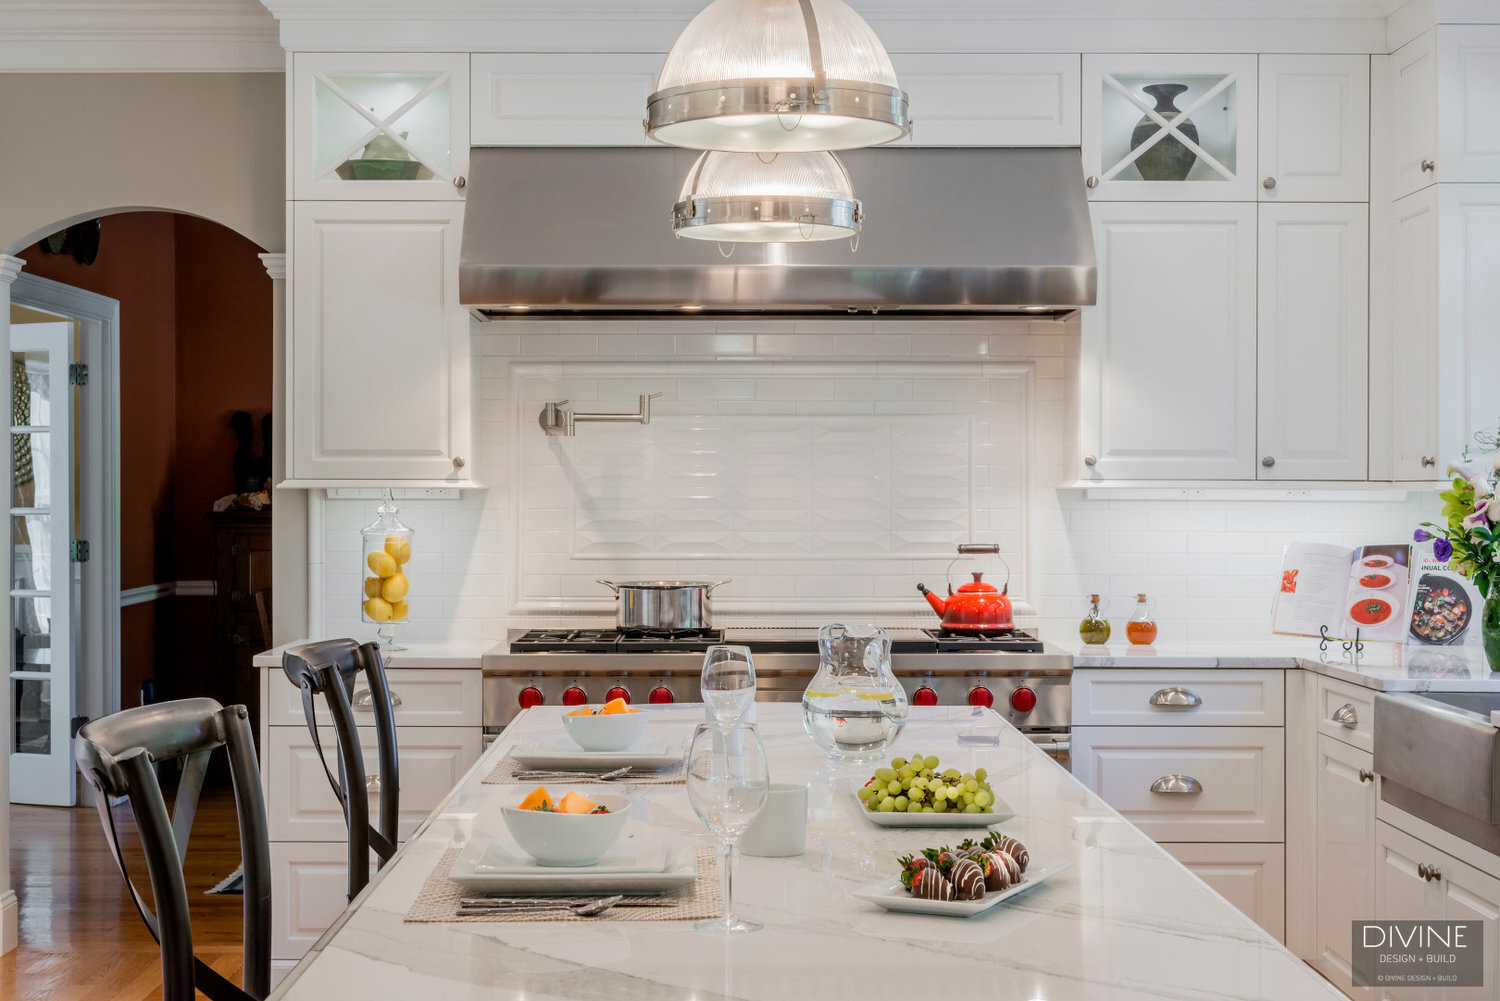 traditional shaker style kitchens with stainless steel farmhouse sink, wolf appliances and chrome pendant lights. Calacatta countertops and medium hardwood floors. Paneled refrigerator. 